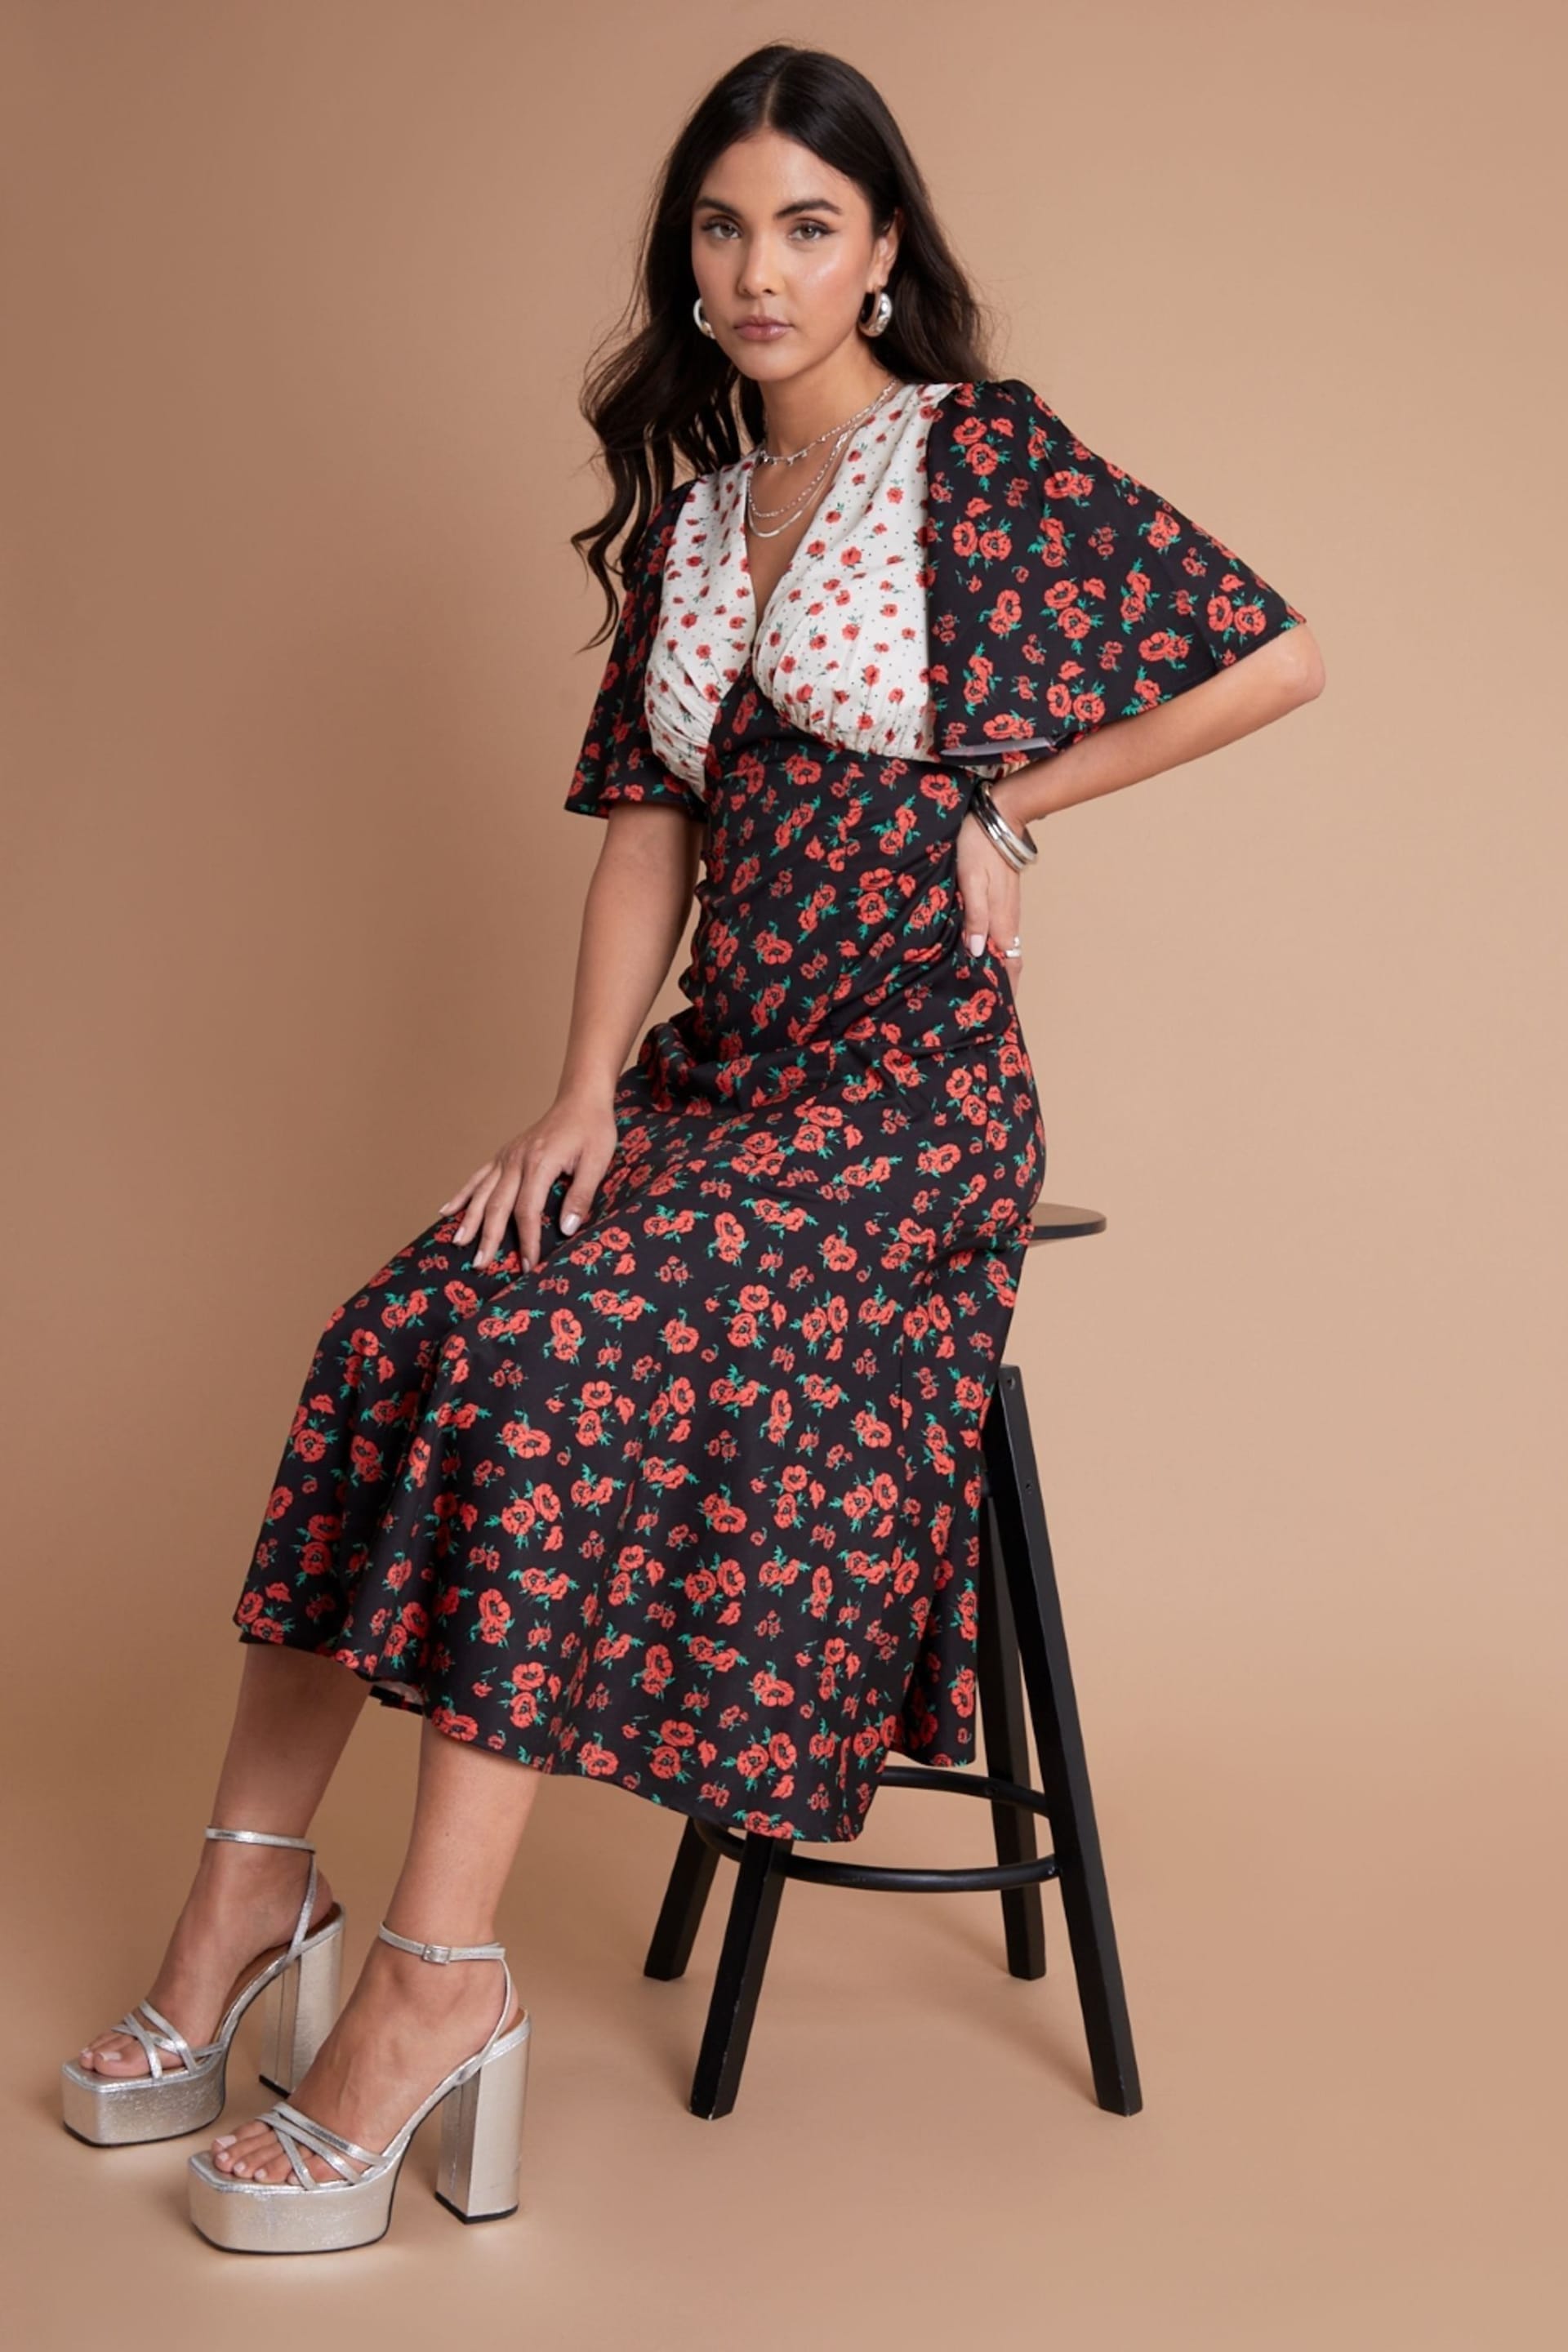 Another Sunday Mix Print Flutter Sleeve Black and Ecru Ditsy Floral Midi White Dress - Image 2 of 3